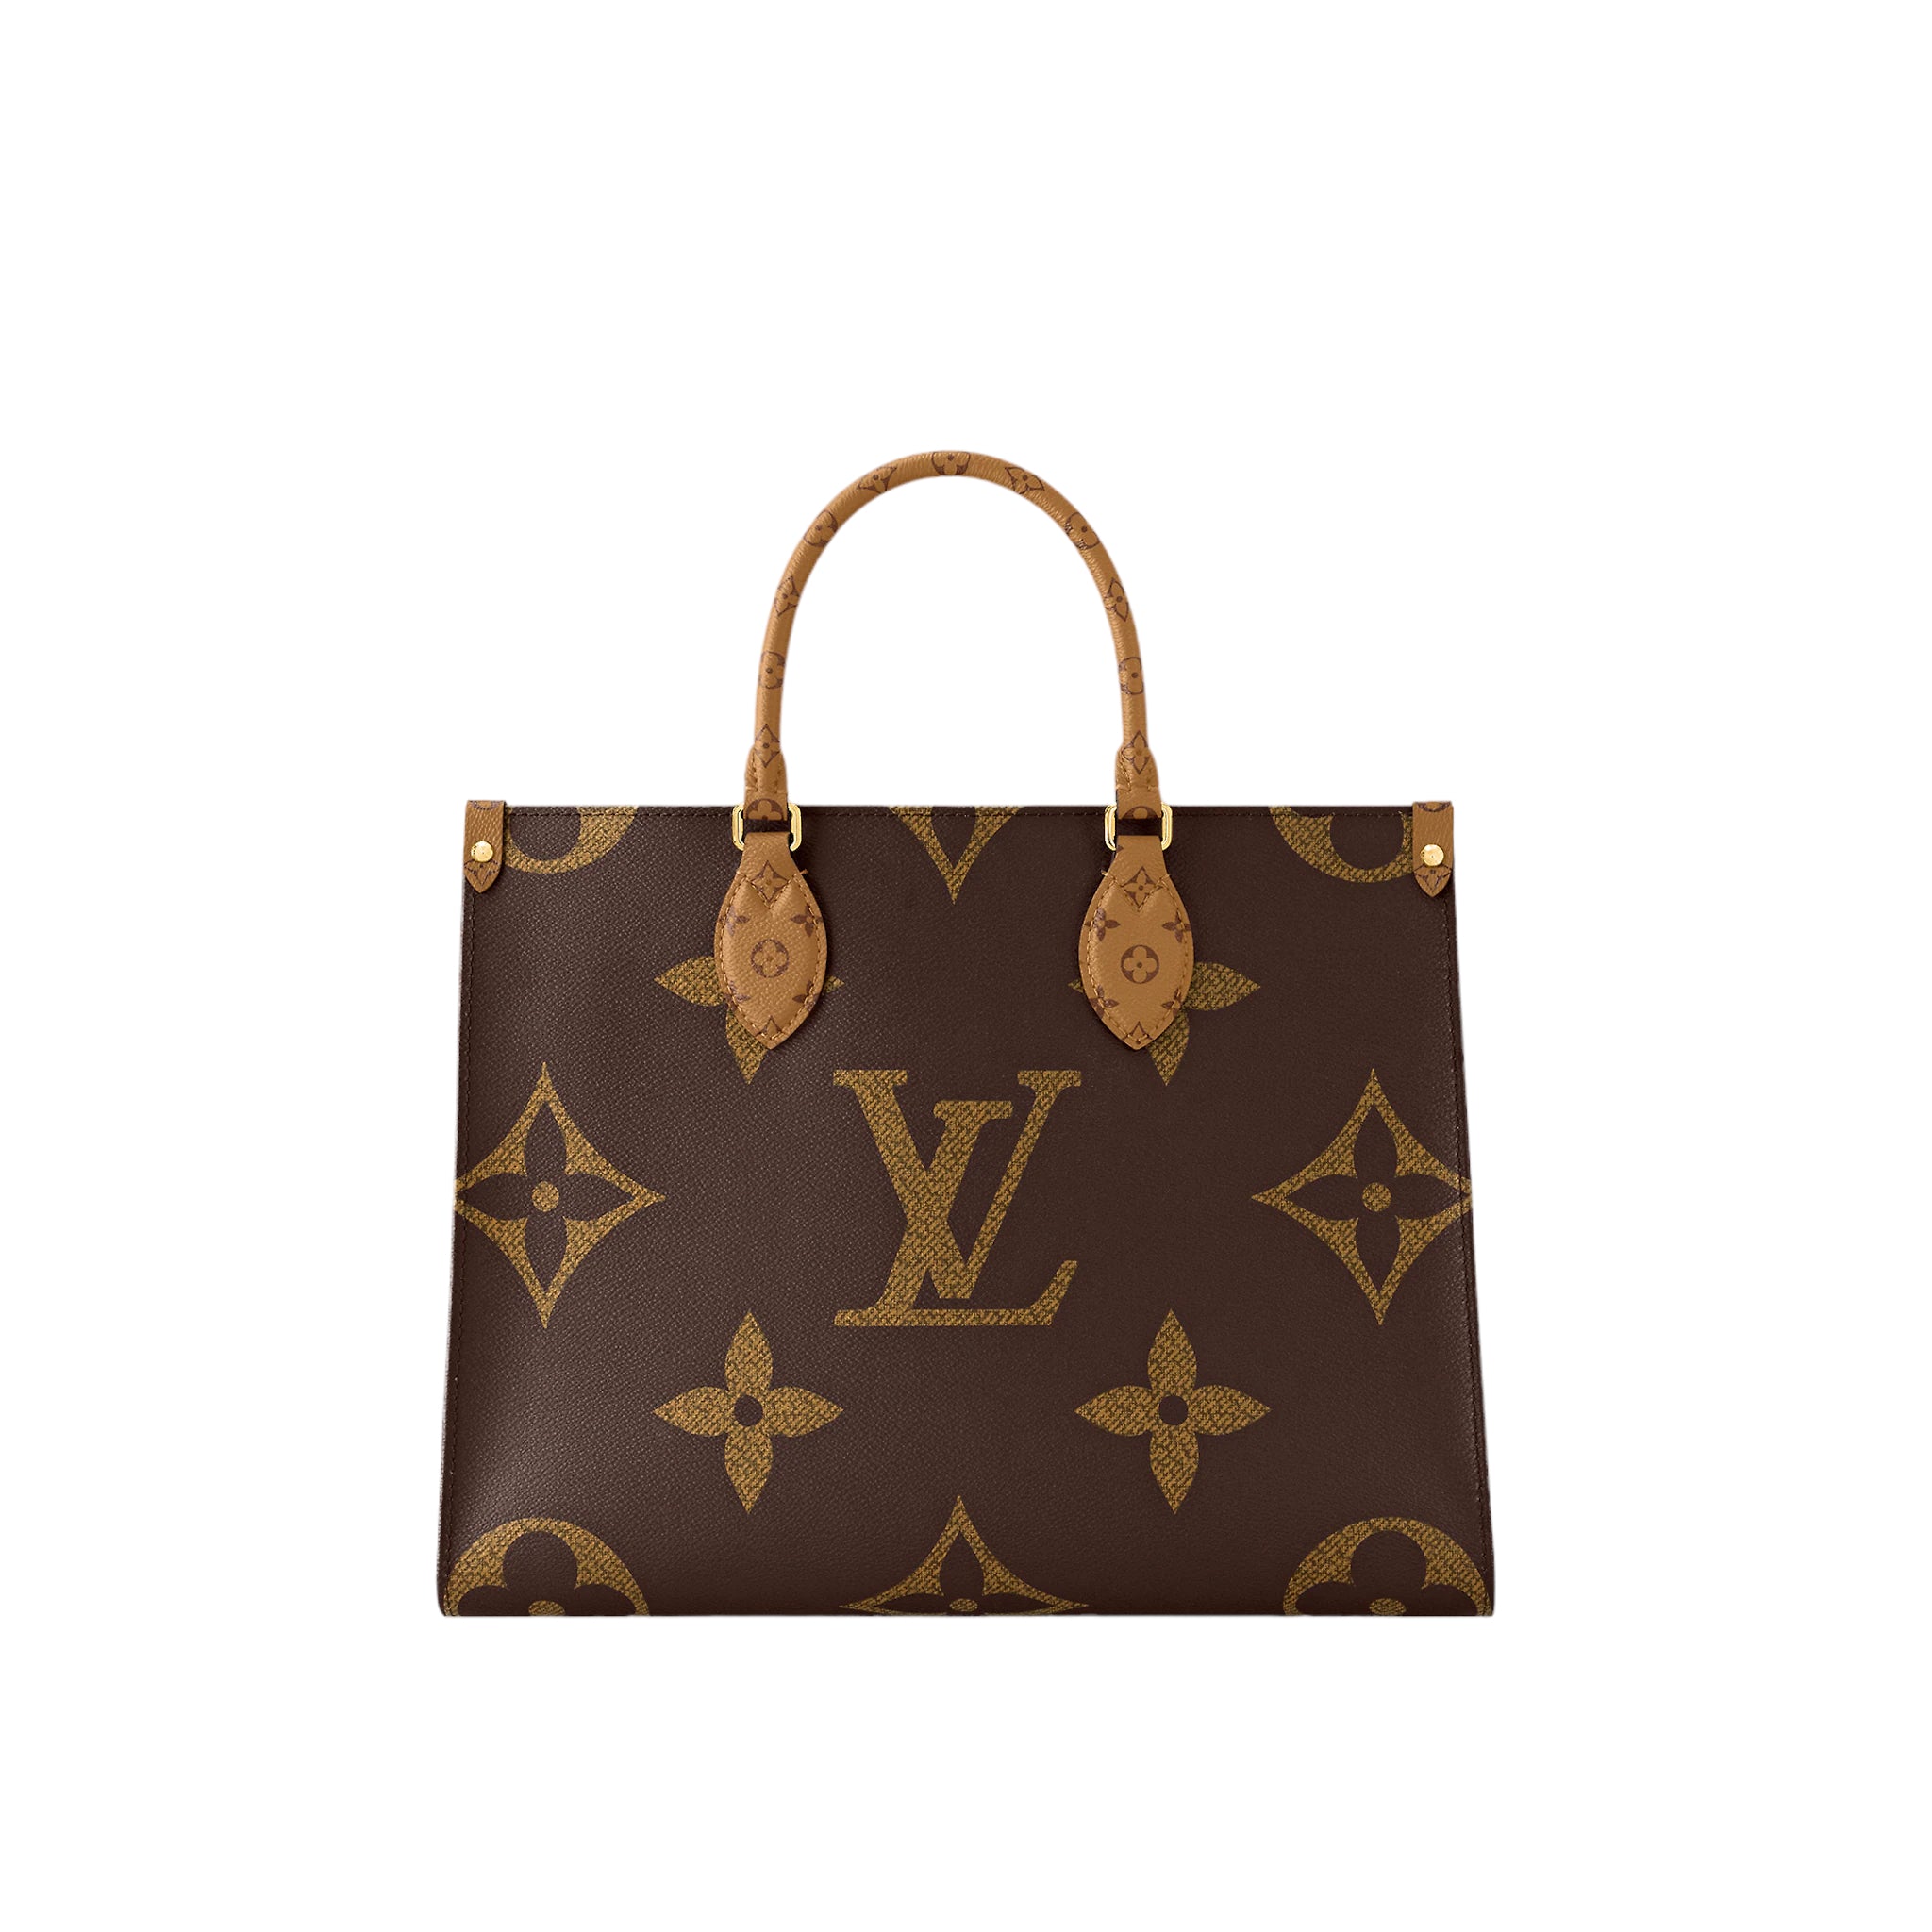 lv onthego mm tote bag